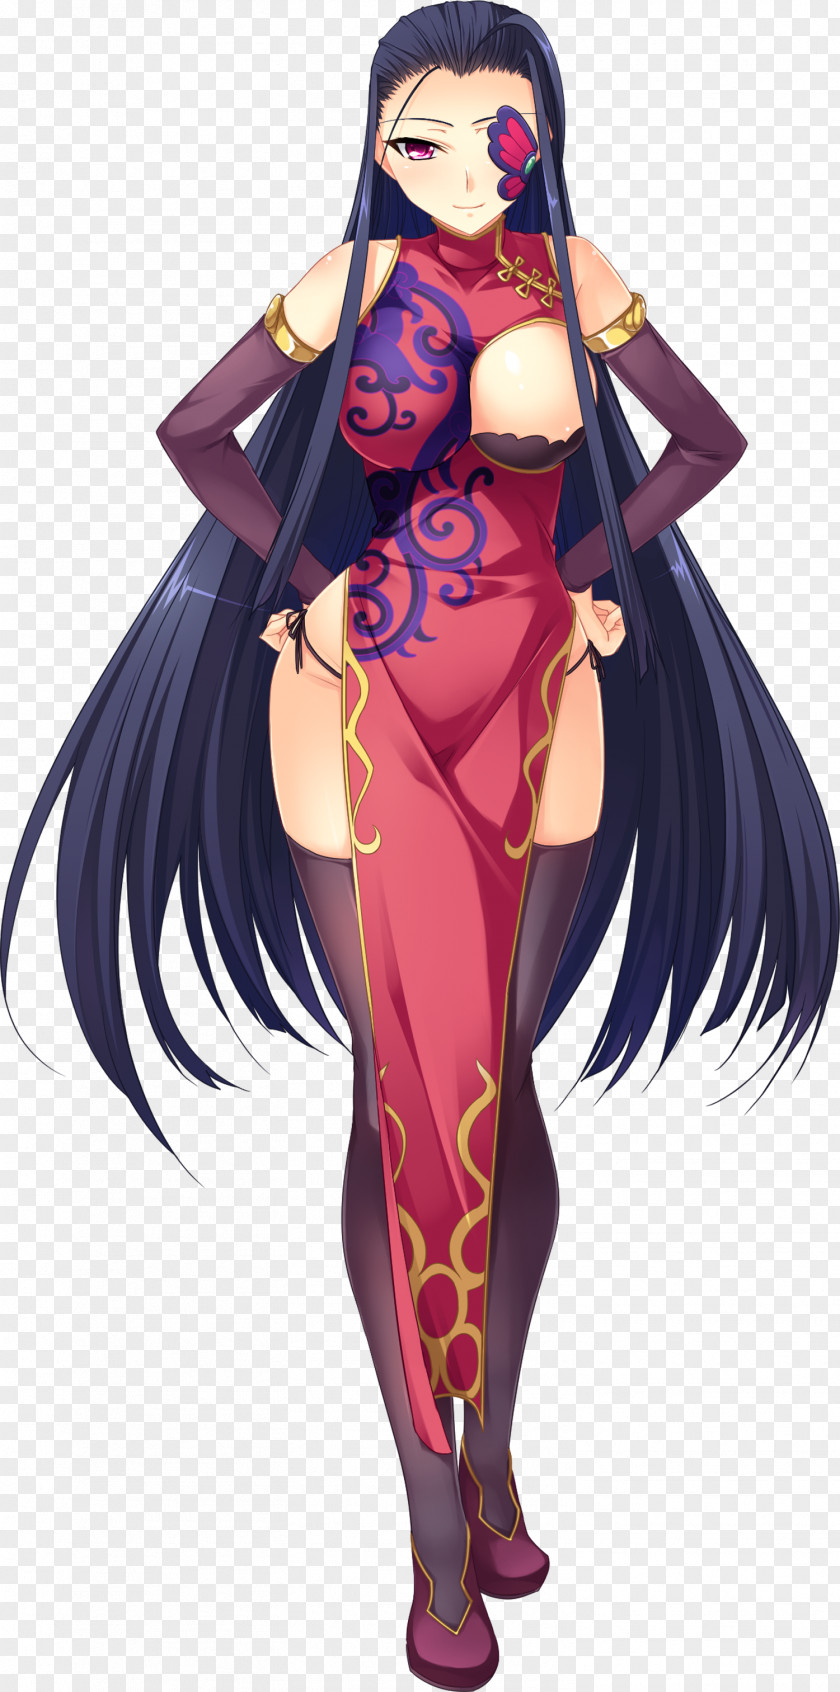 Koihime Musō 真·恋姬†无双 Portable Network Graphics Anime HOWEVER PNG HOWEVER, clipart PNG